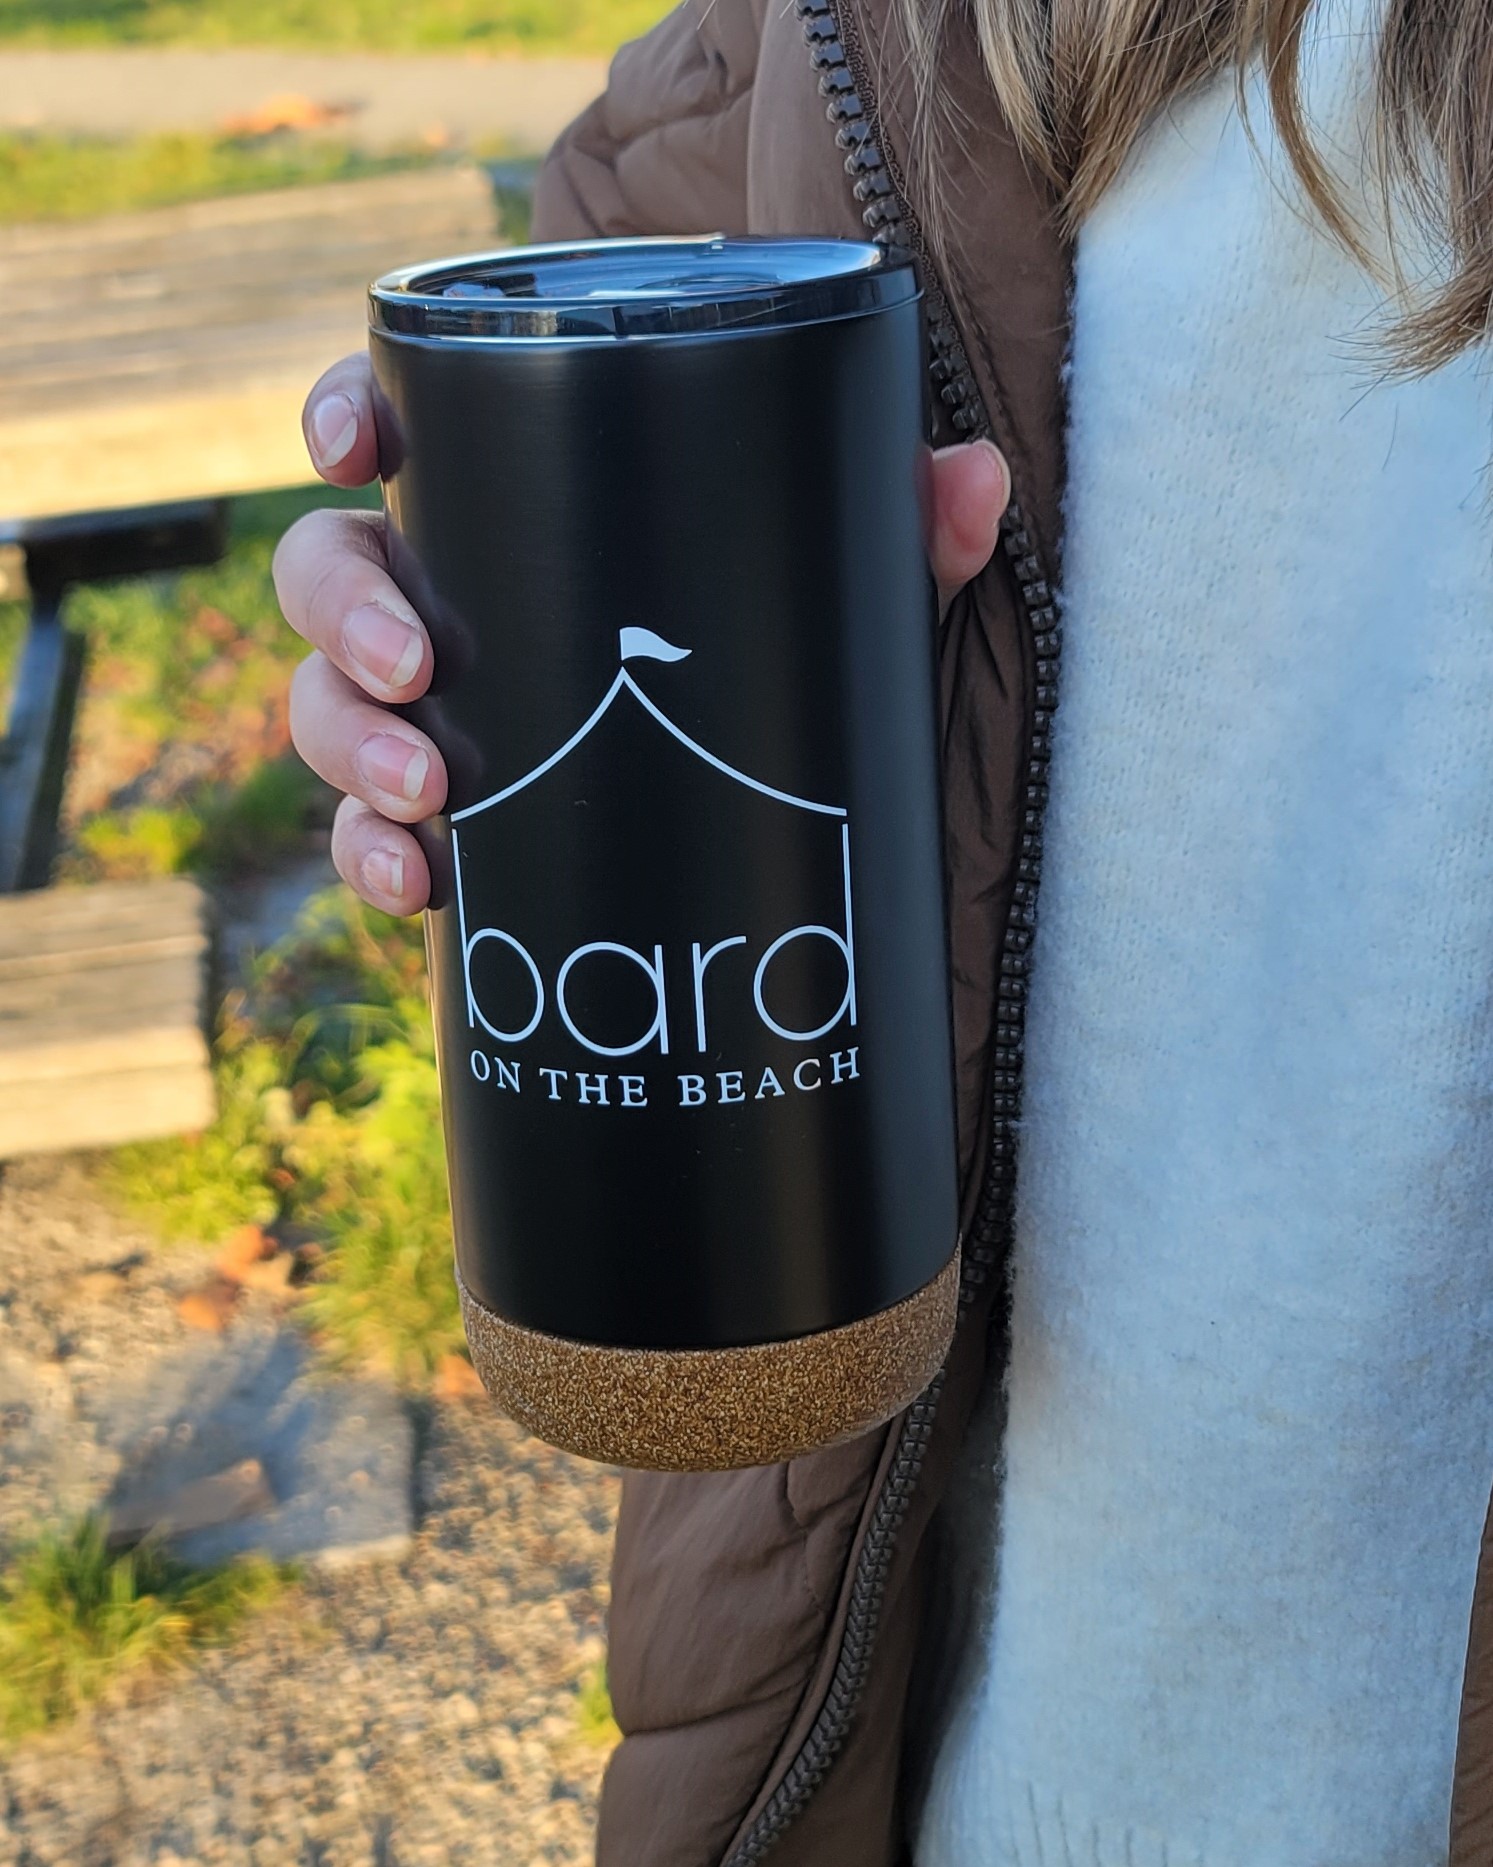 Person holding black Bard on the Beach Tumbler outside in the sunshine